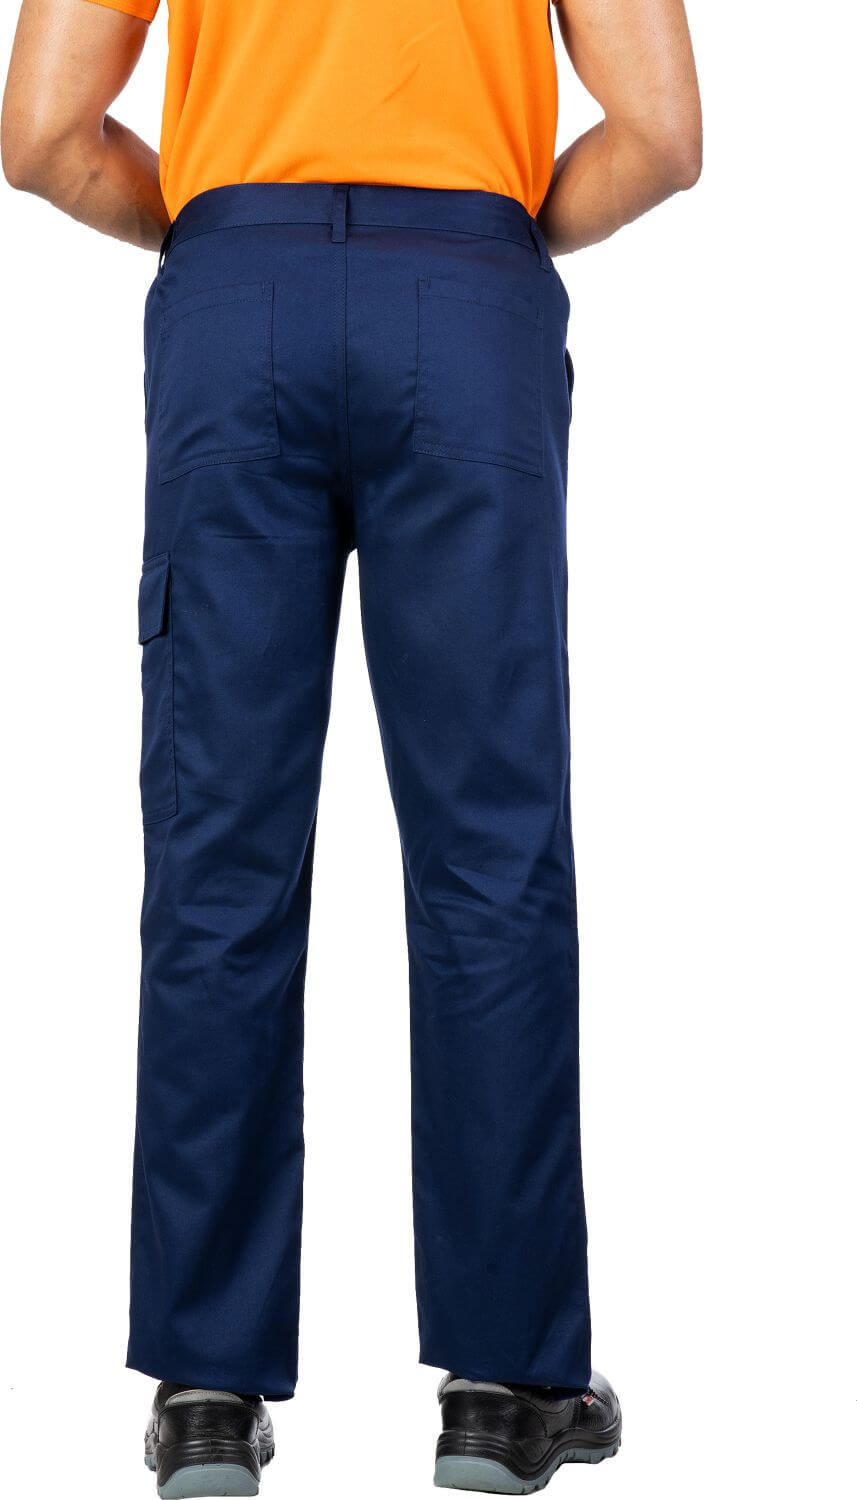 Cimarron Navy Blue Light-weight Protective Trousers